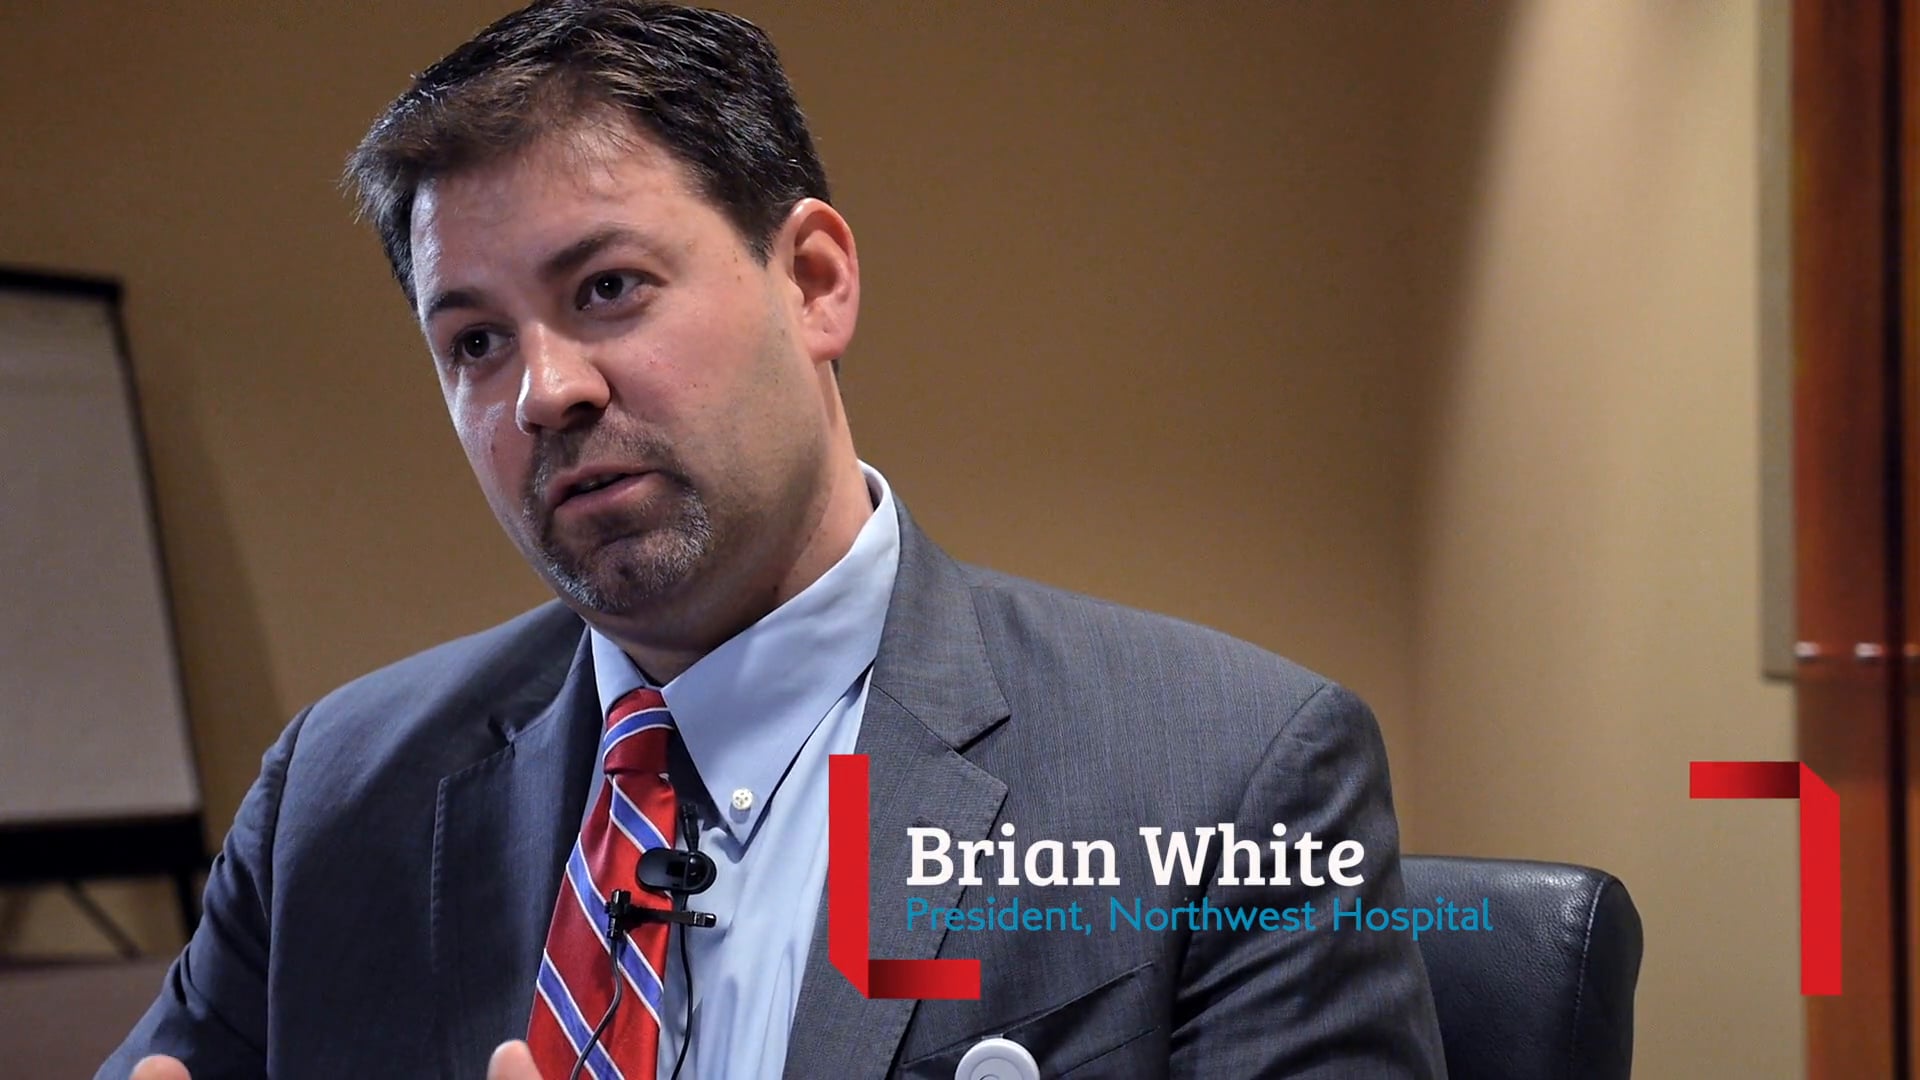 CEO Brian White on the value of Executive Coaching